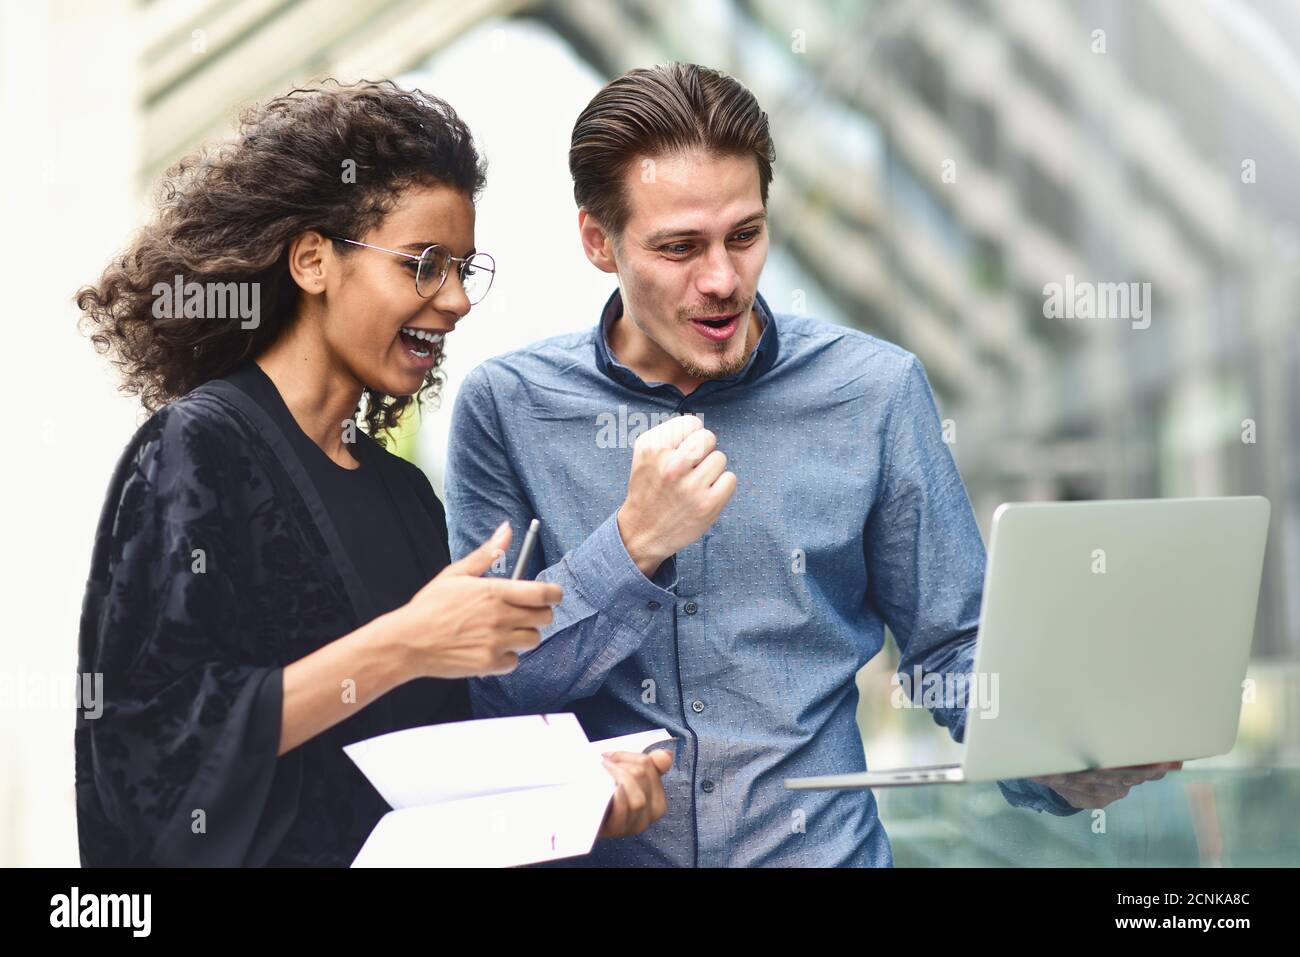 Business meeting. Man and woman discussing work and looking at the laptop screen. Working together in the open air. Stock Photo